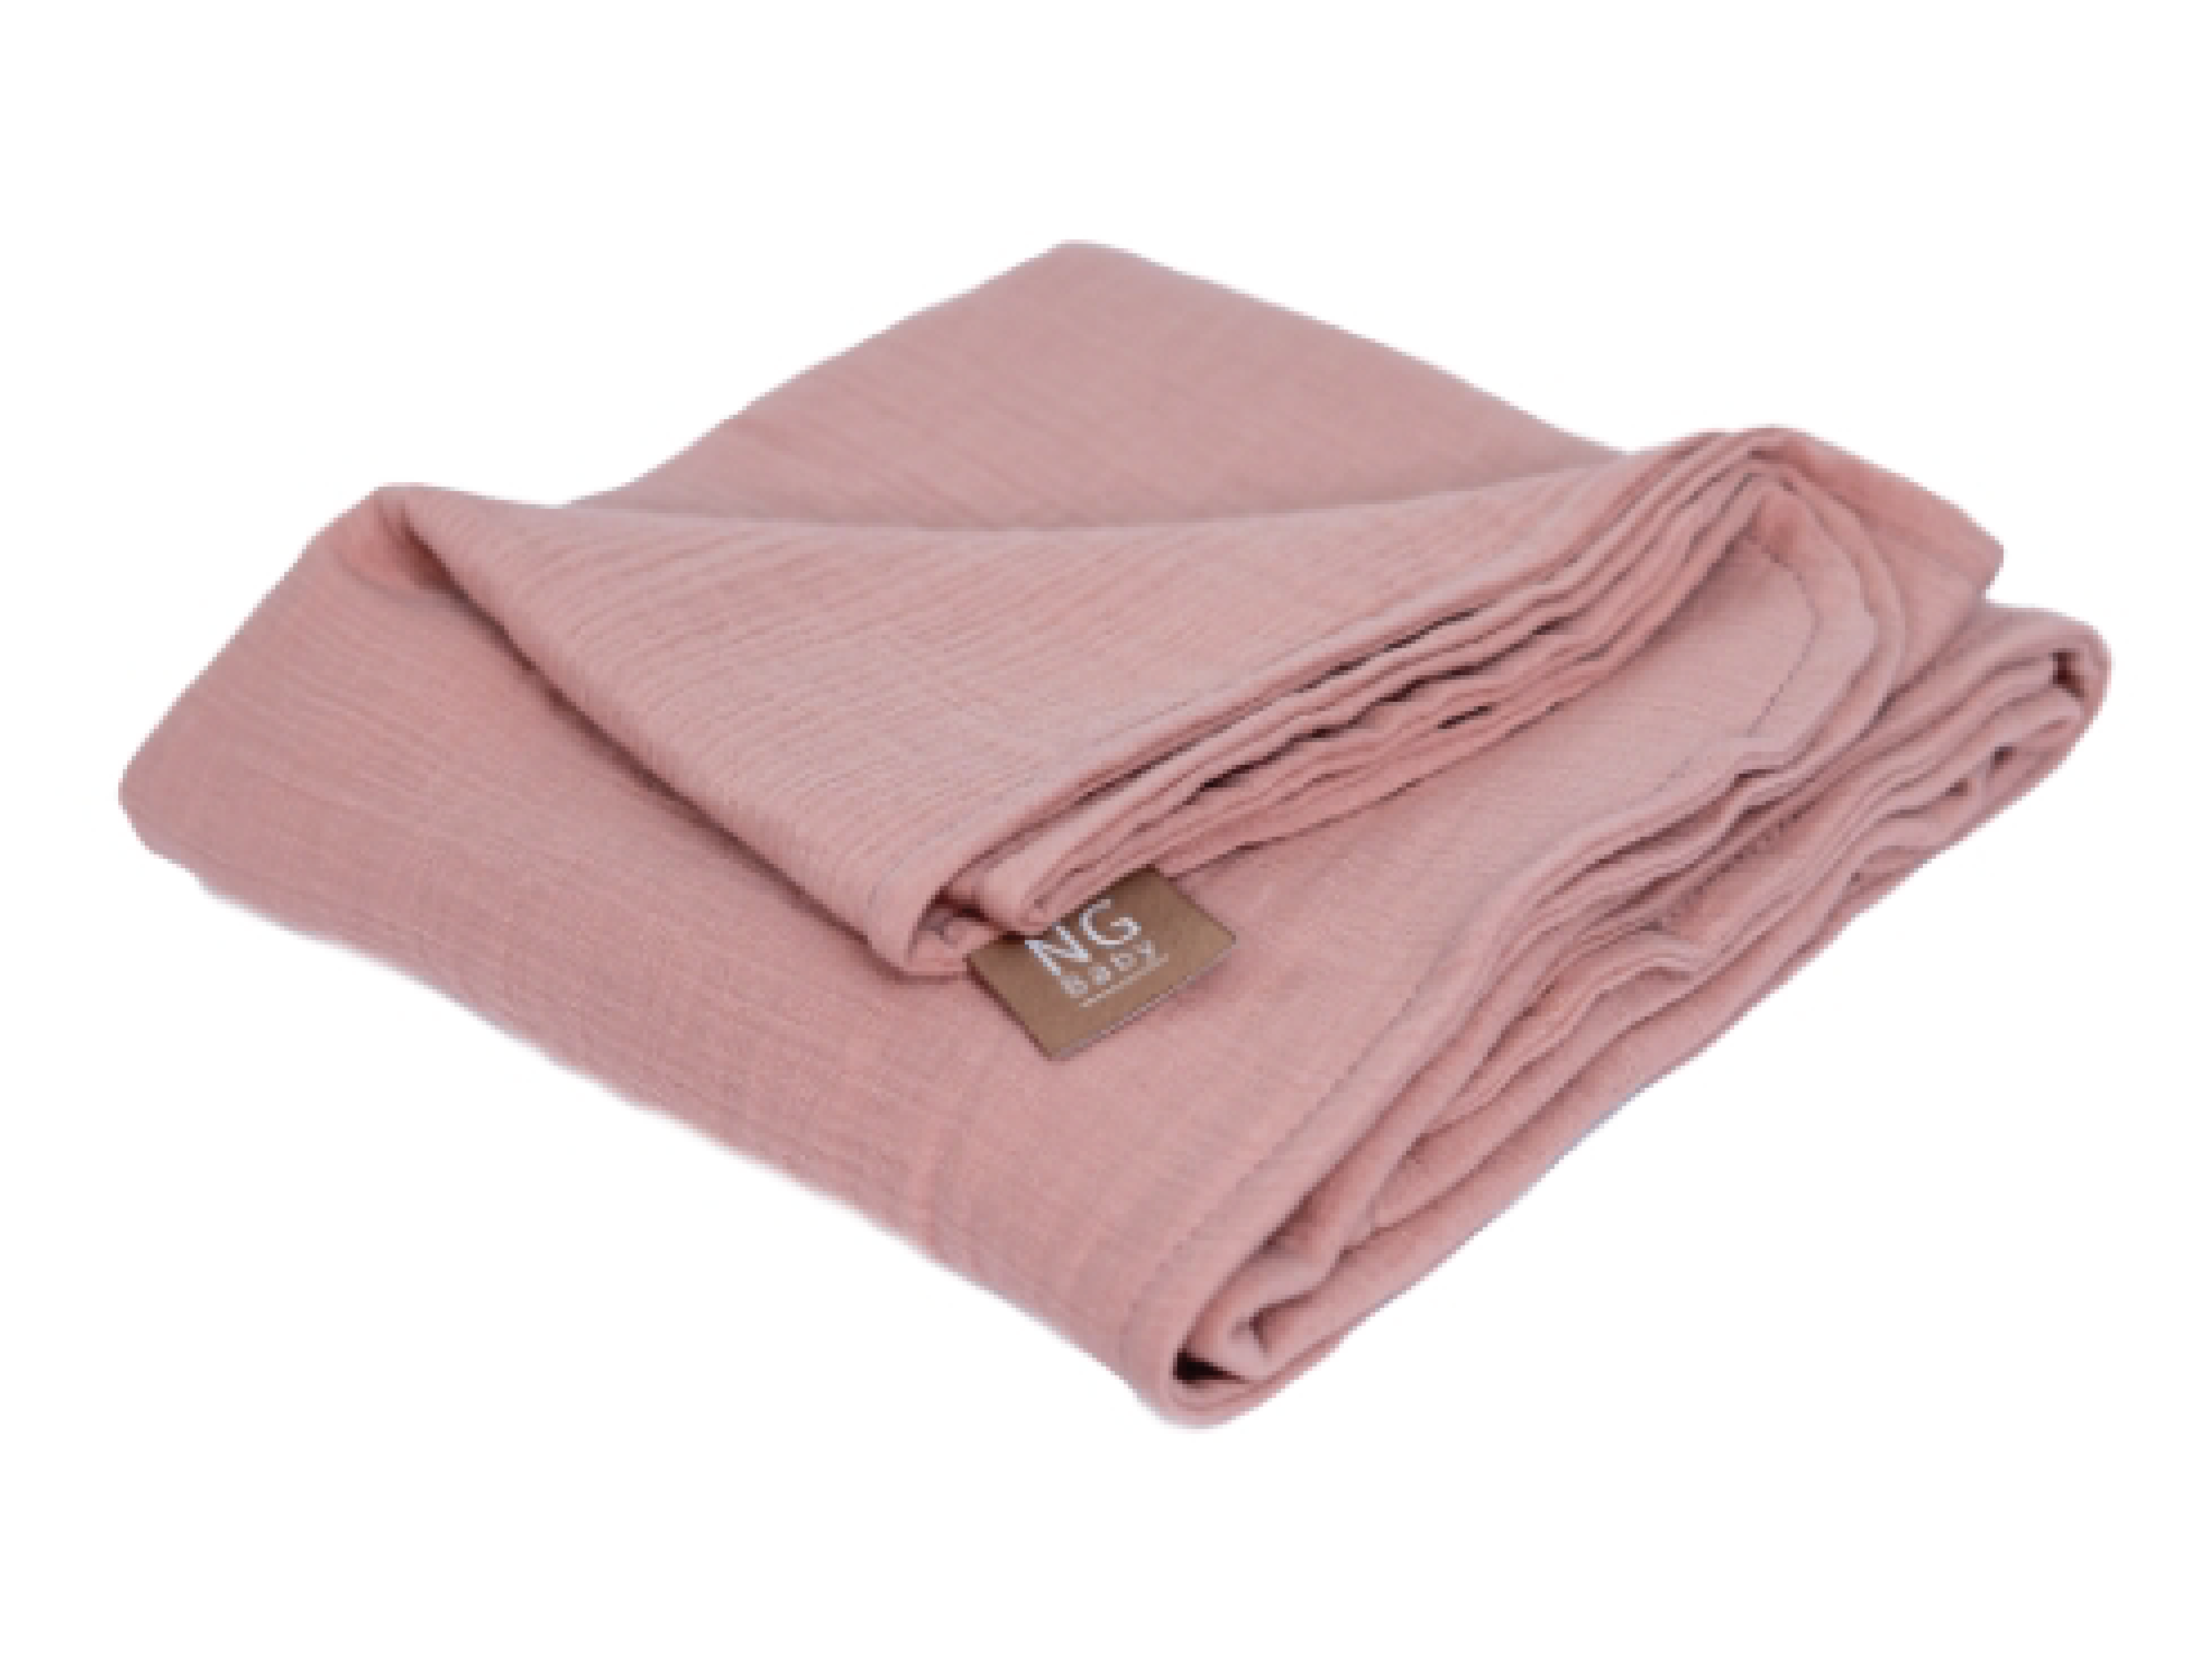 NG Baby Muselinteppe Deluxe, 60 x 90 cm, Dusty Rose